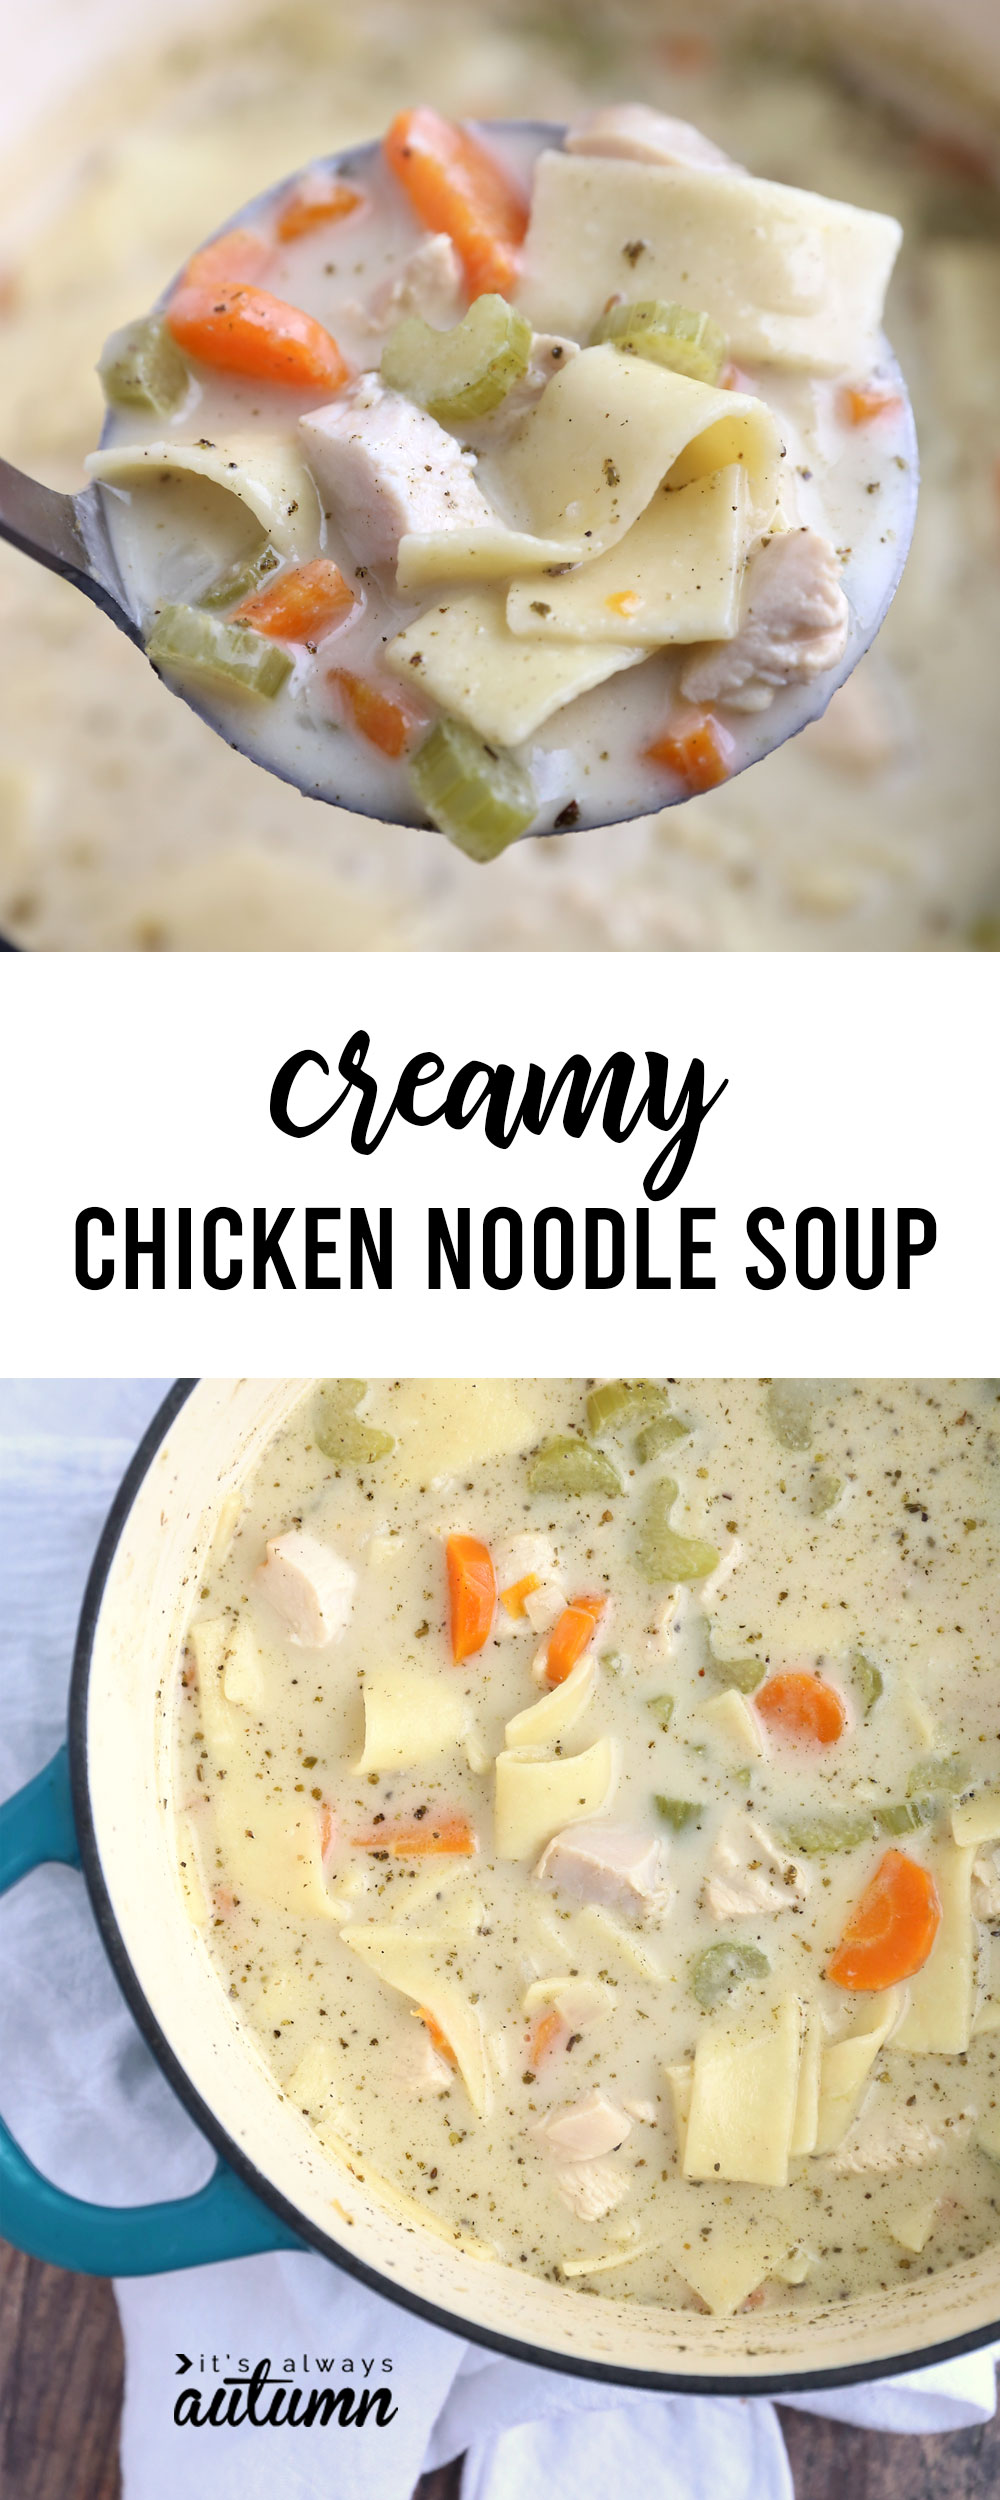 This creamy chicken noodle soup is packed with flavor and so comforting!